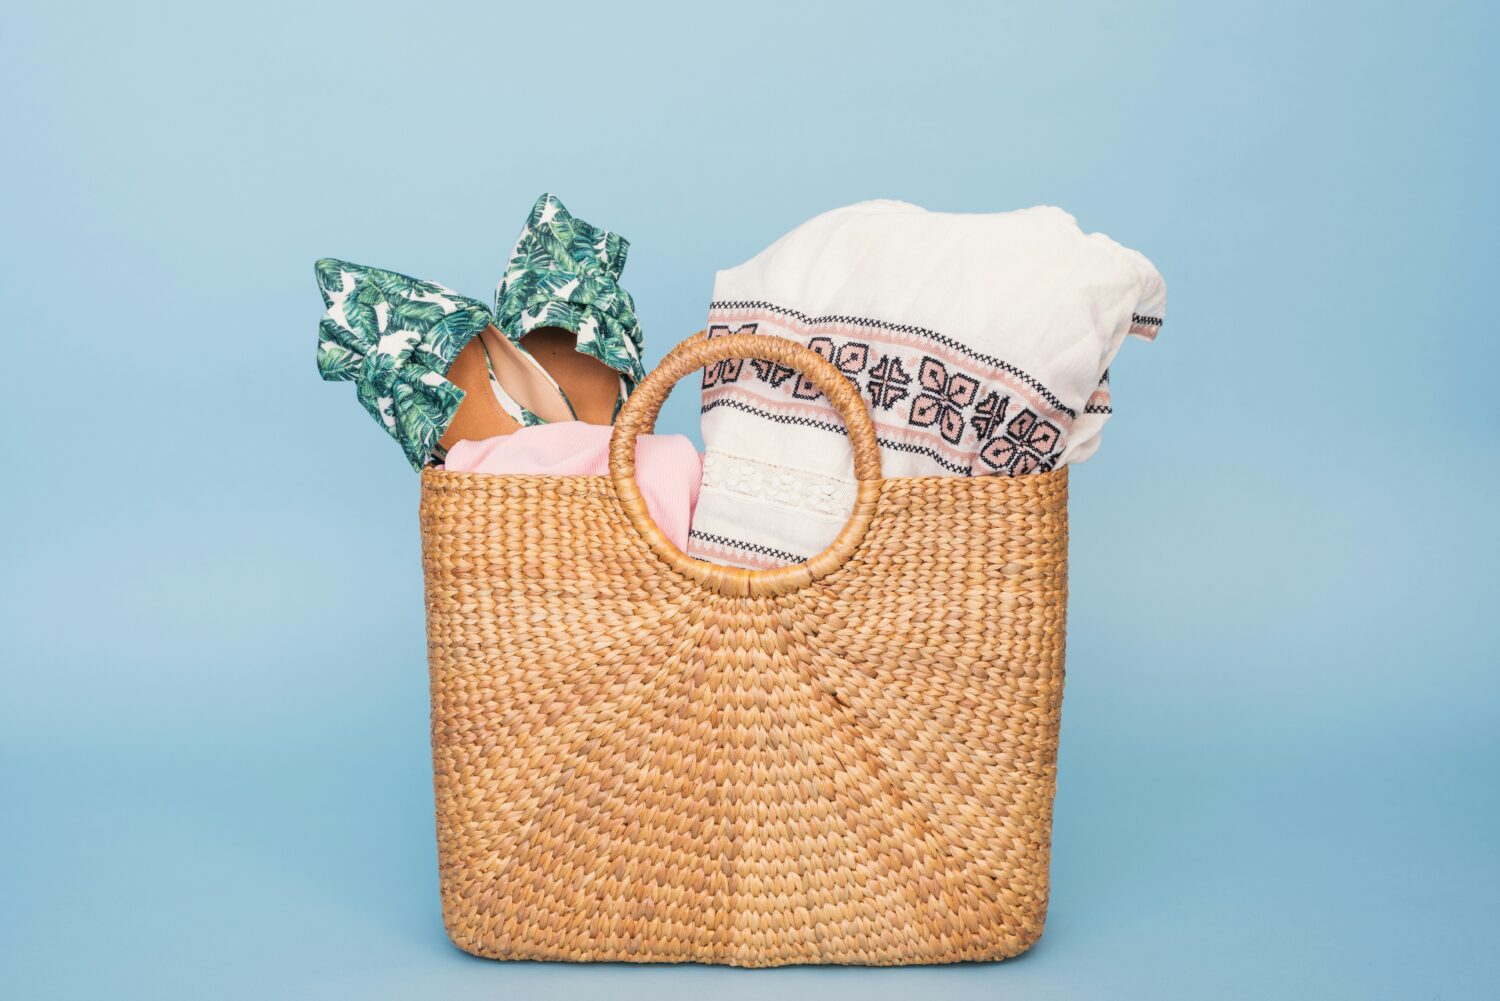 A straw beach tote packed with everything you need for a fun day eat the beach.